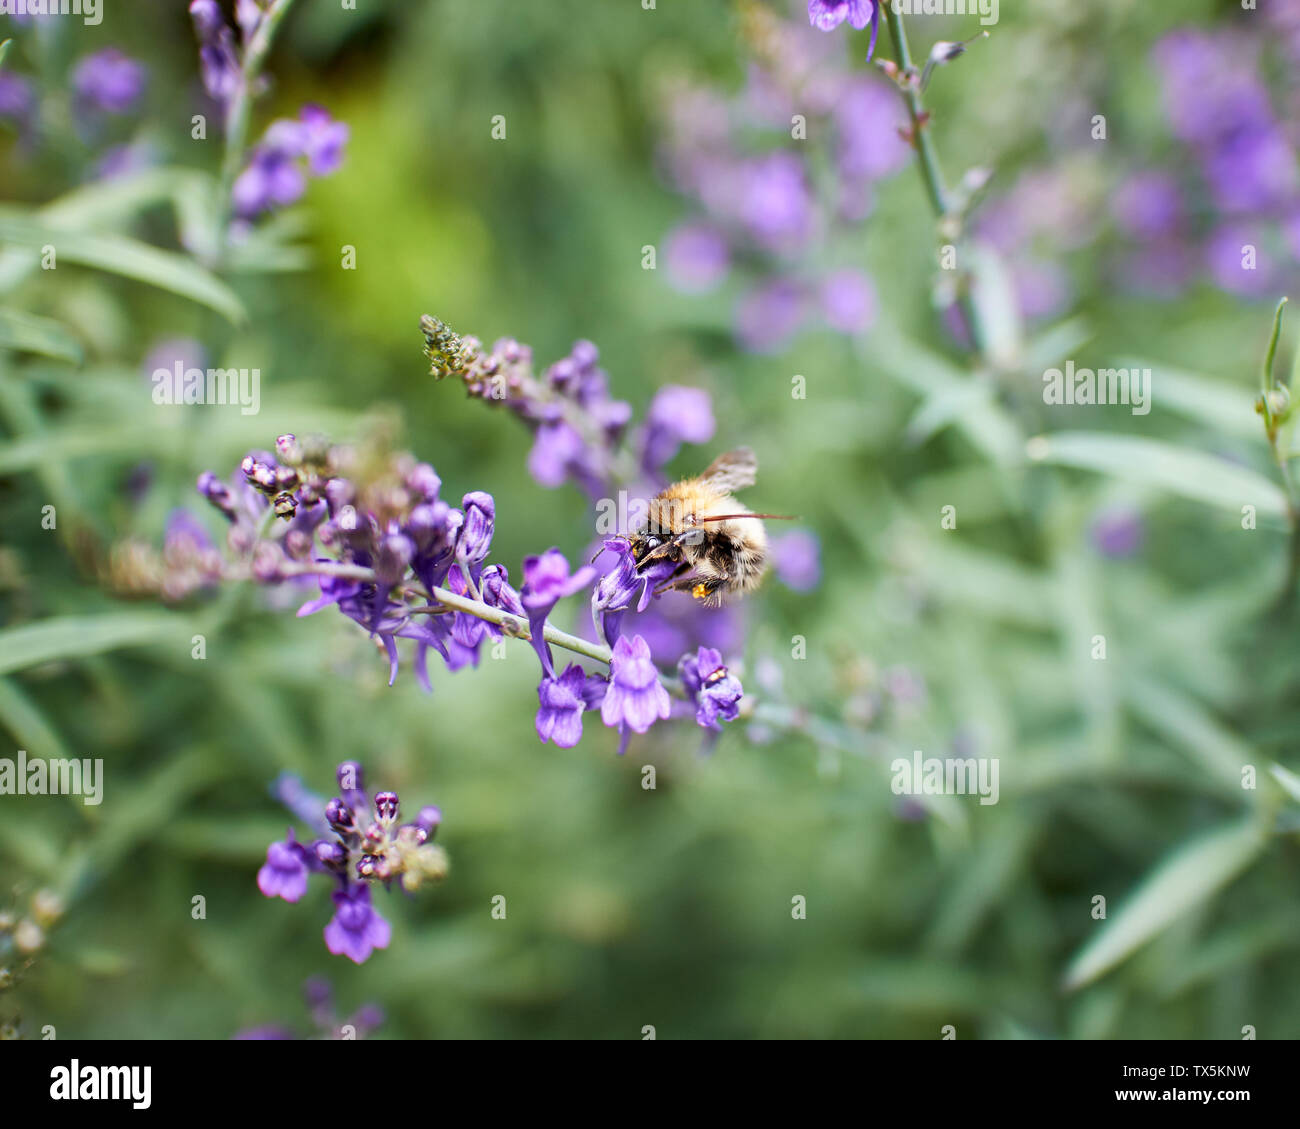 Close up of a Honey Bee feeding on Lupin (Lupinus) flower. Stock Photo